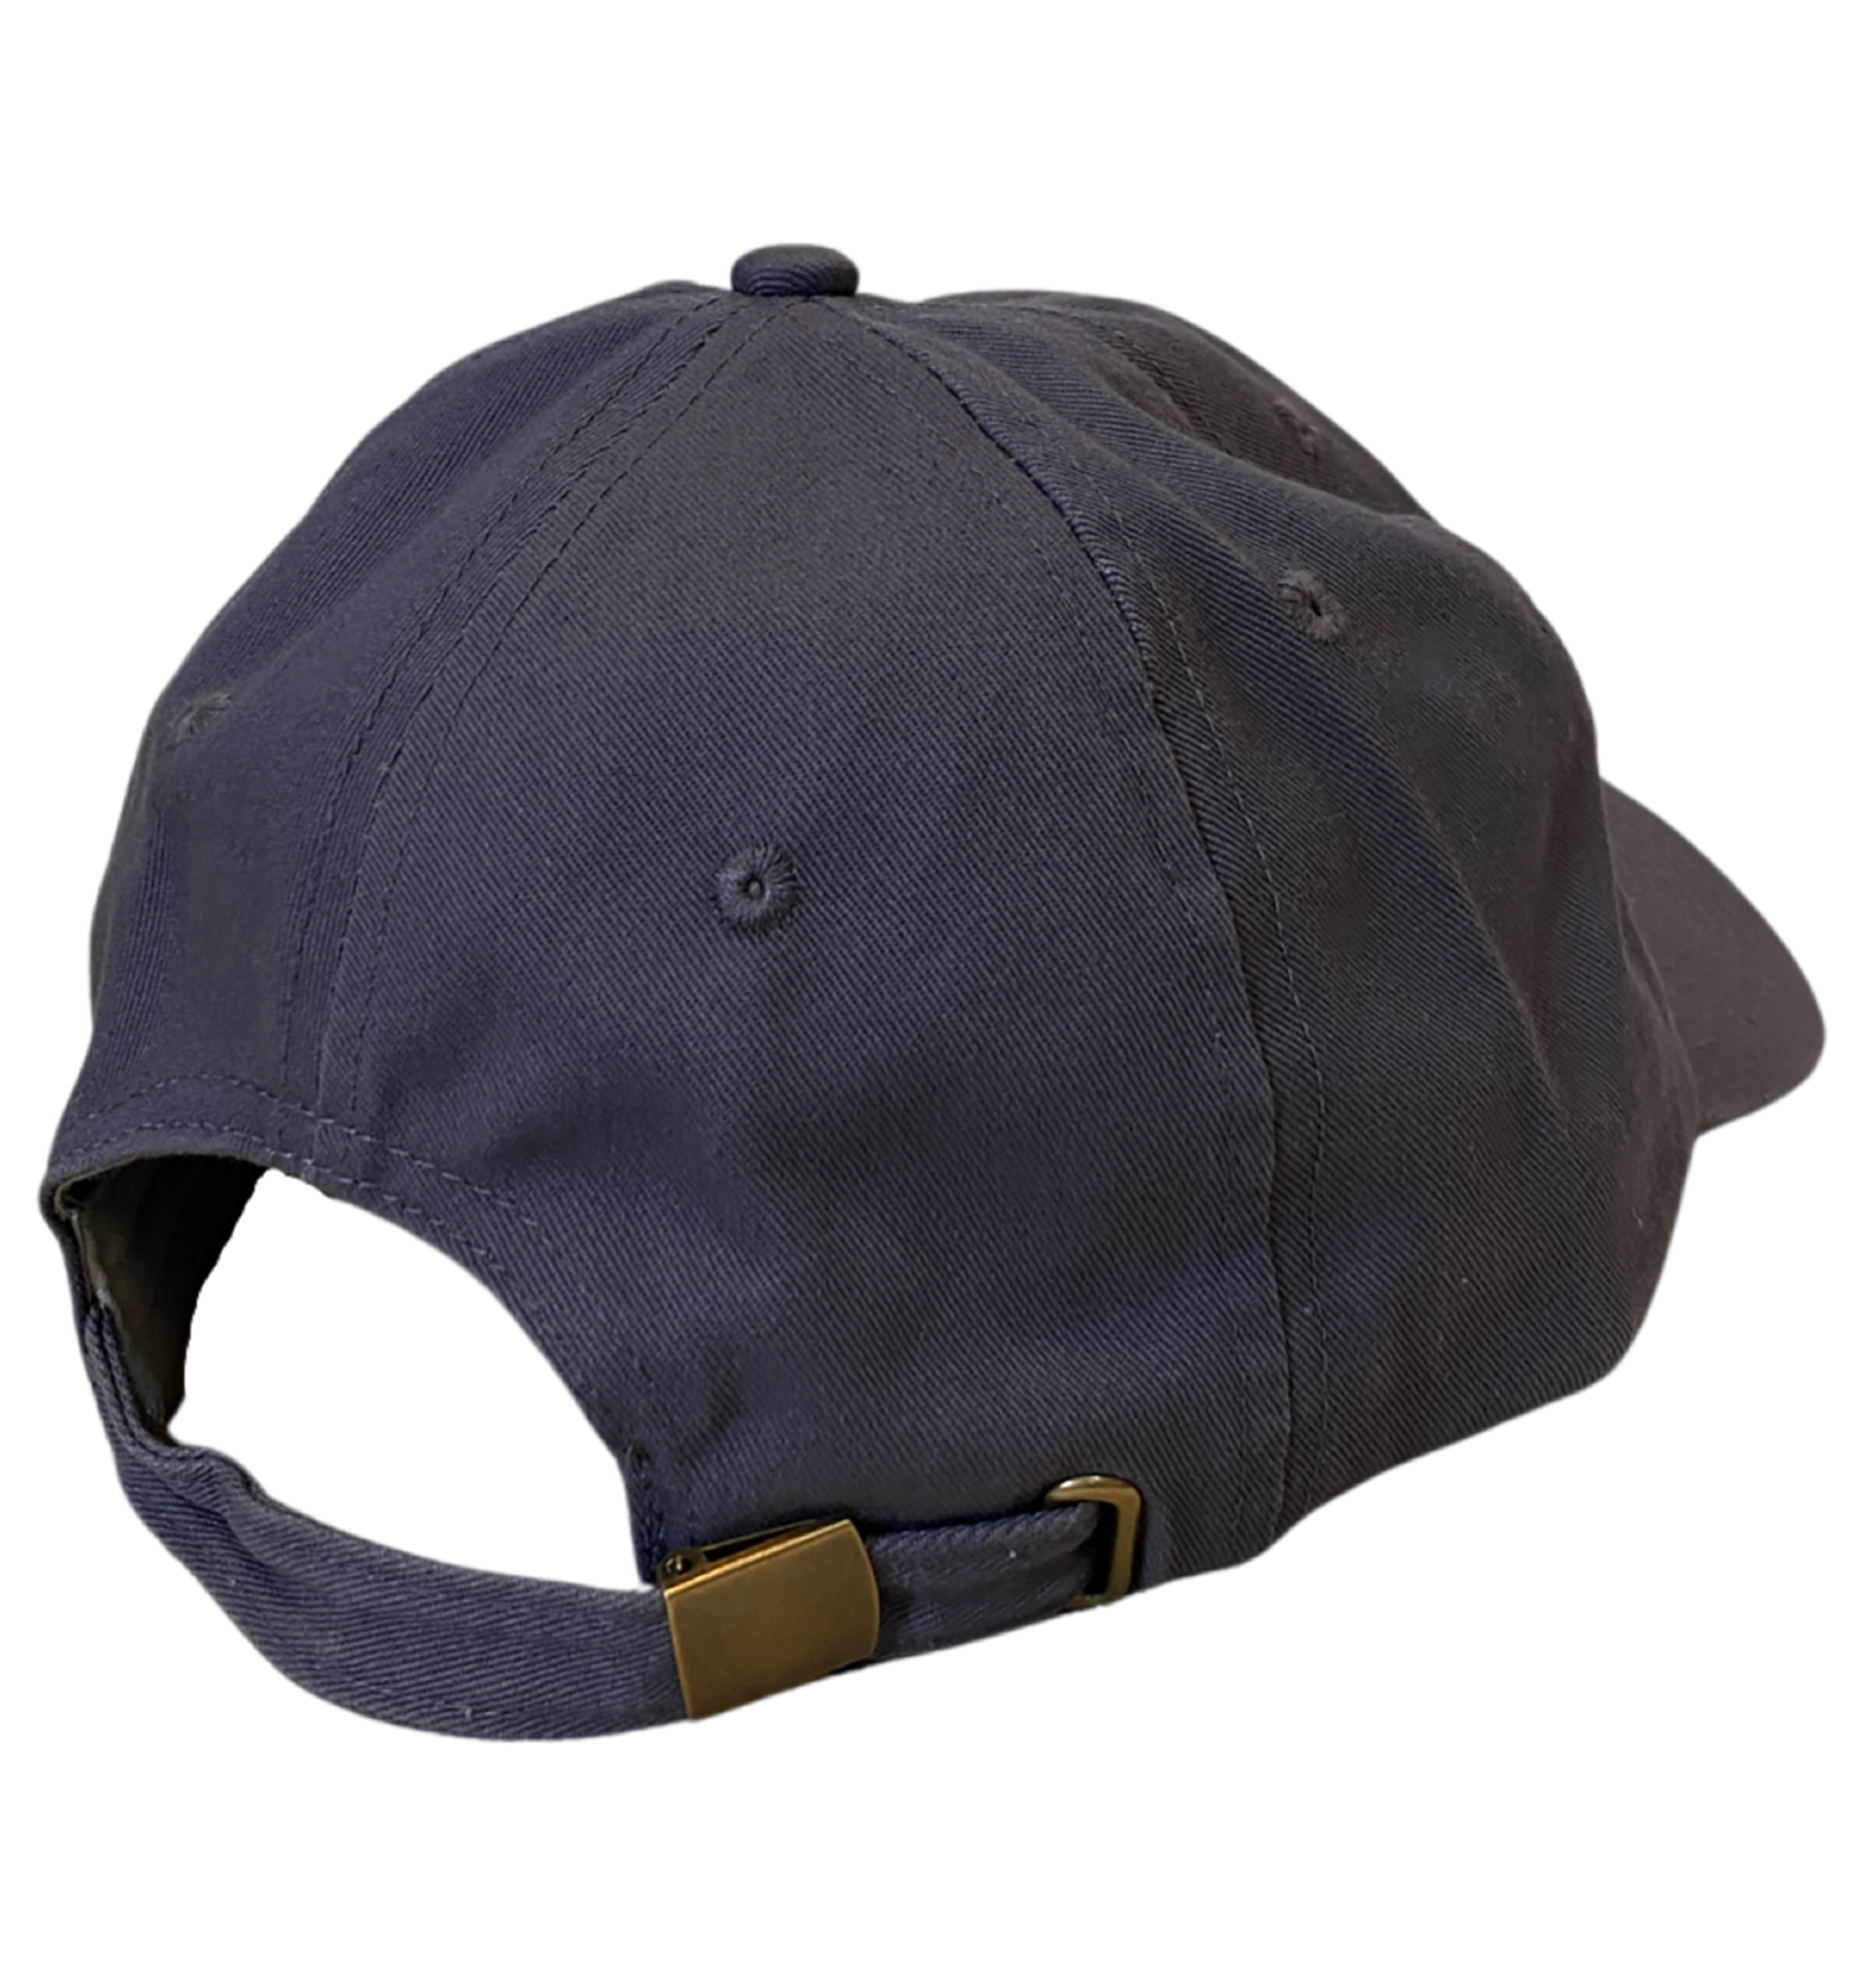 Spoke Charcoal Embroidered Washed Chino Twill Cap